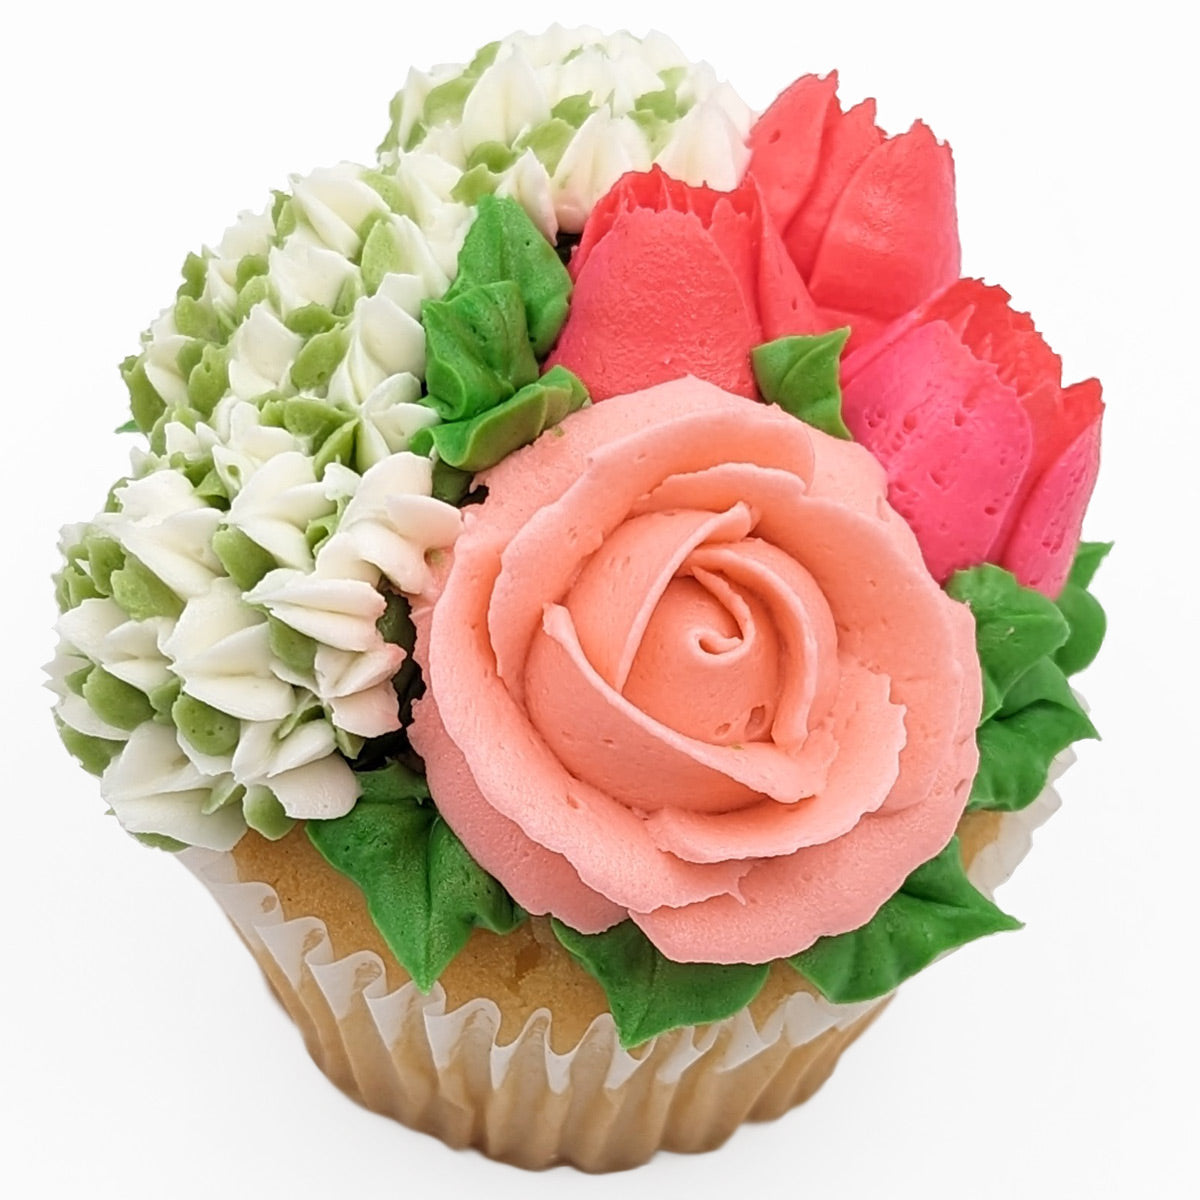 JUMBO Flower Cupcakes delivered